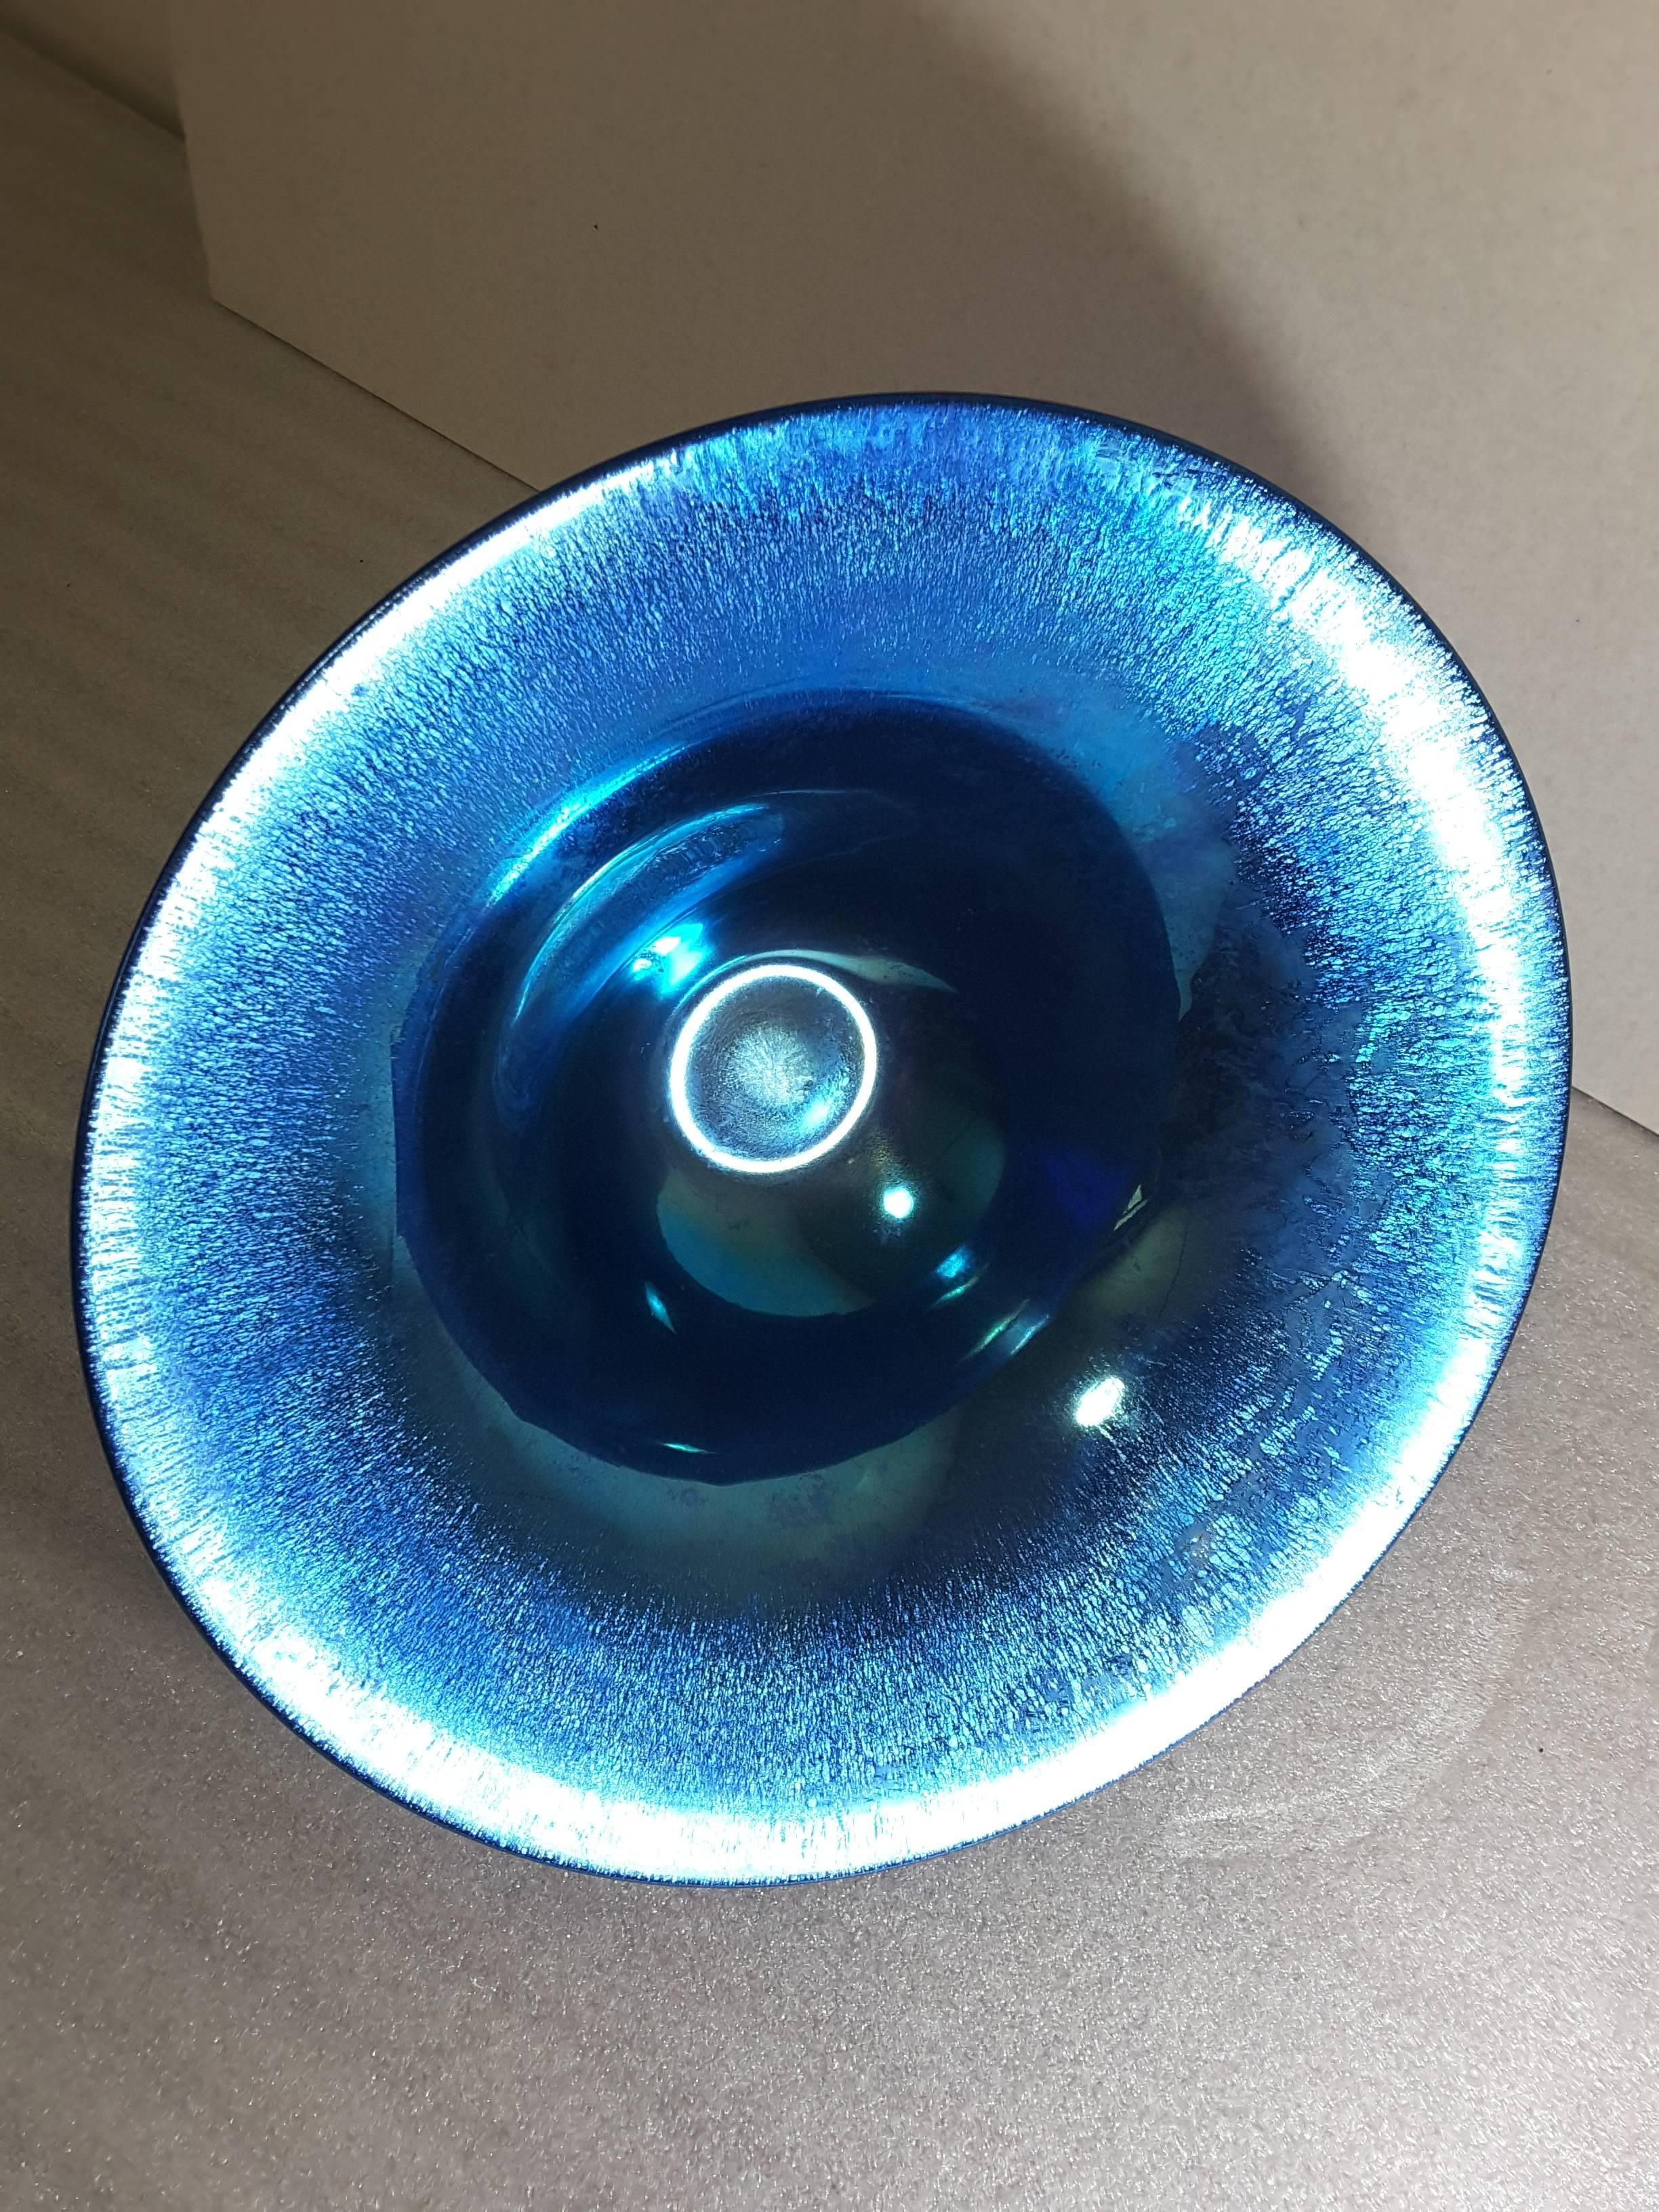 Late 20th Century Lundberg Studios Iridescent Shooting Star Art Glass Bowl, Signed and Dated 1999